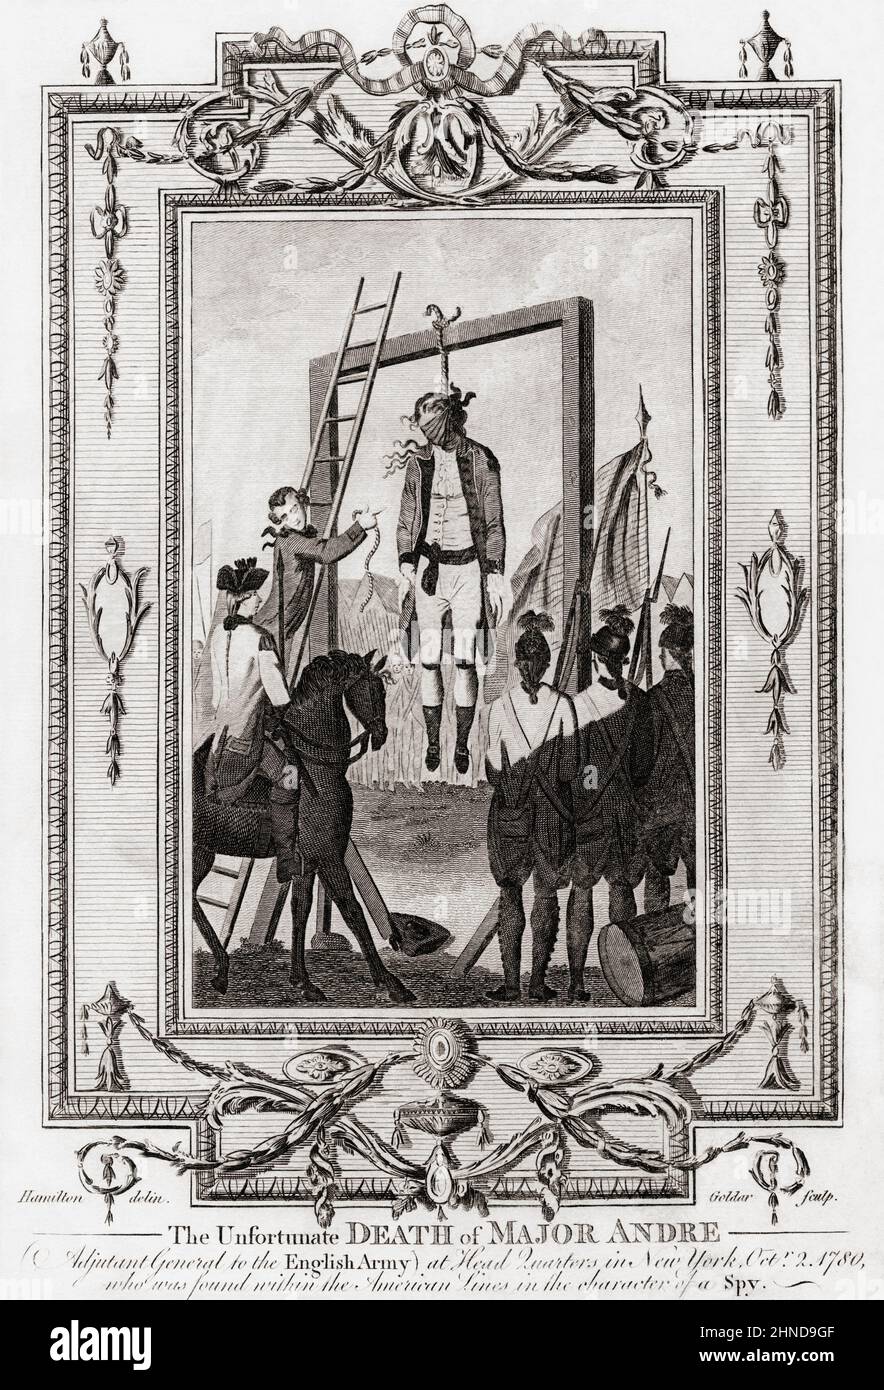 The execution of Major Andre, October 2, 1780.  John Andre, 1751 - 1780, British army major during the American Revolutionary War.  He was captured behind American lines whilst on a mission and hanged as a spy.   From Edward Barnard's The New, Impartial and Complete History of England published 1790. Stock Photo